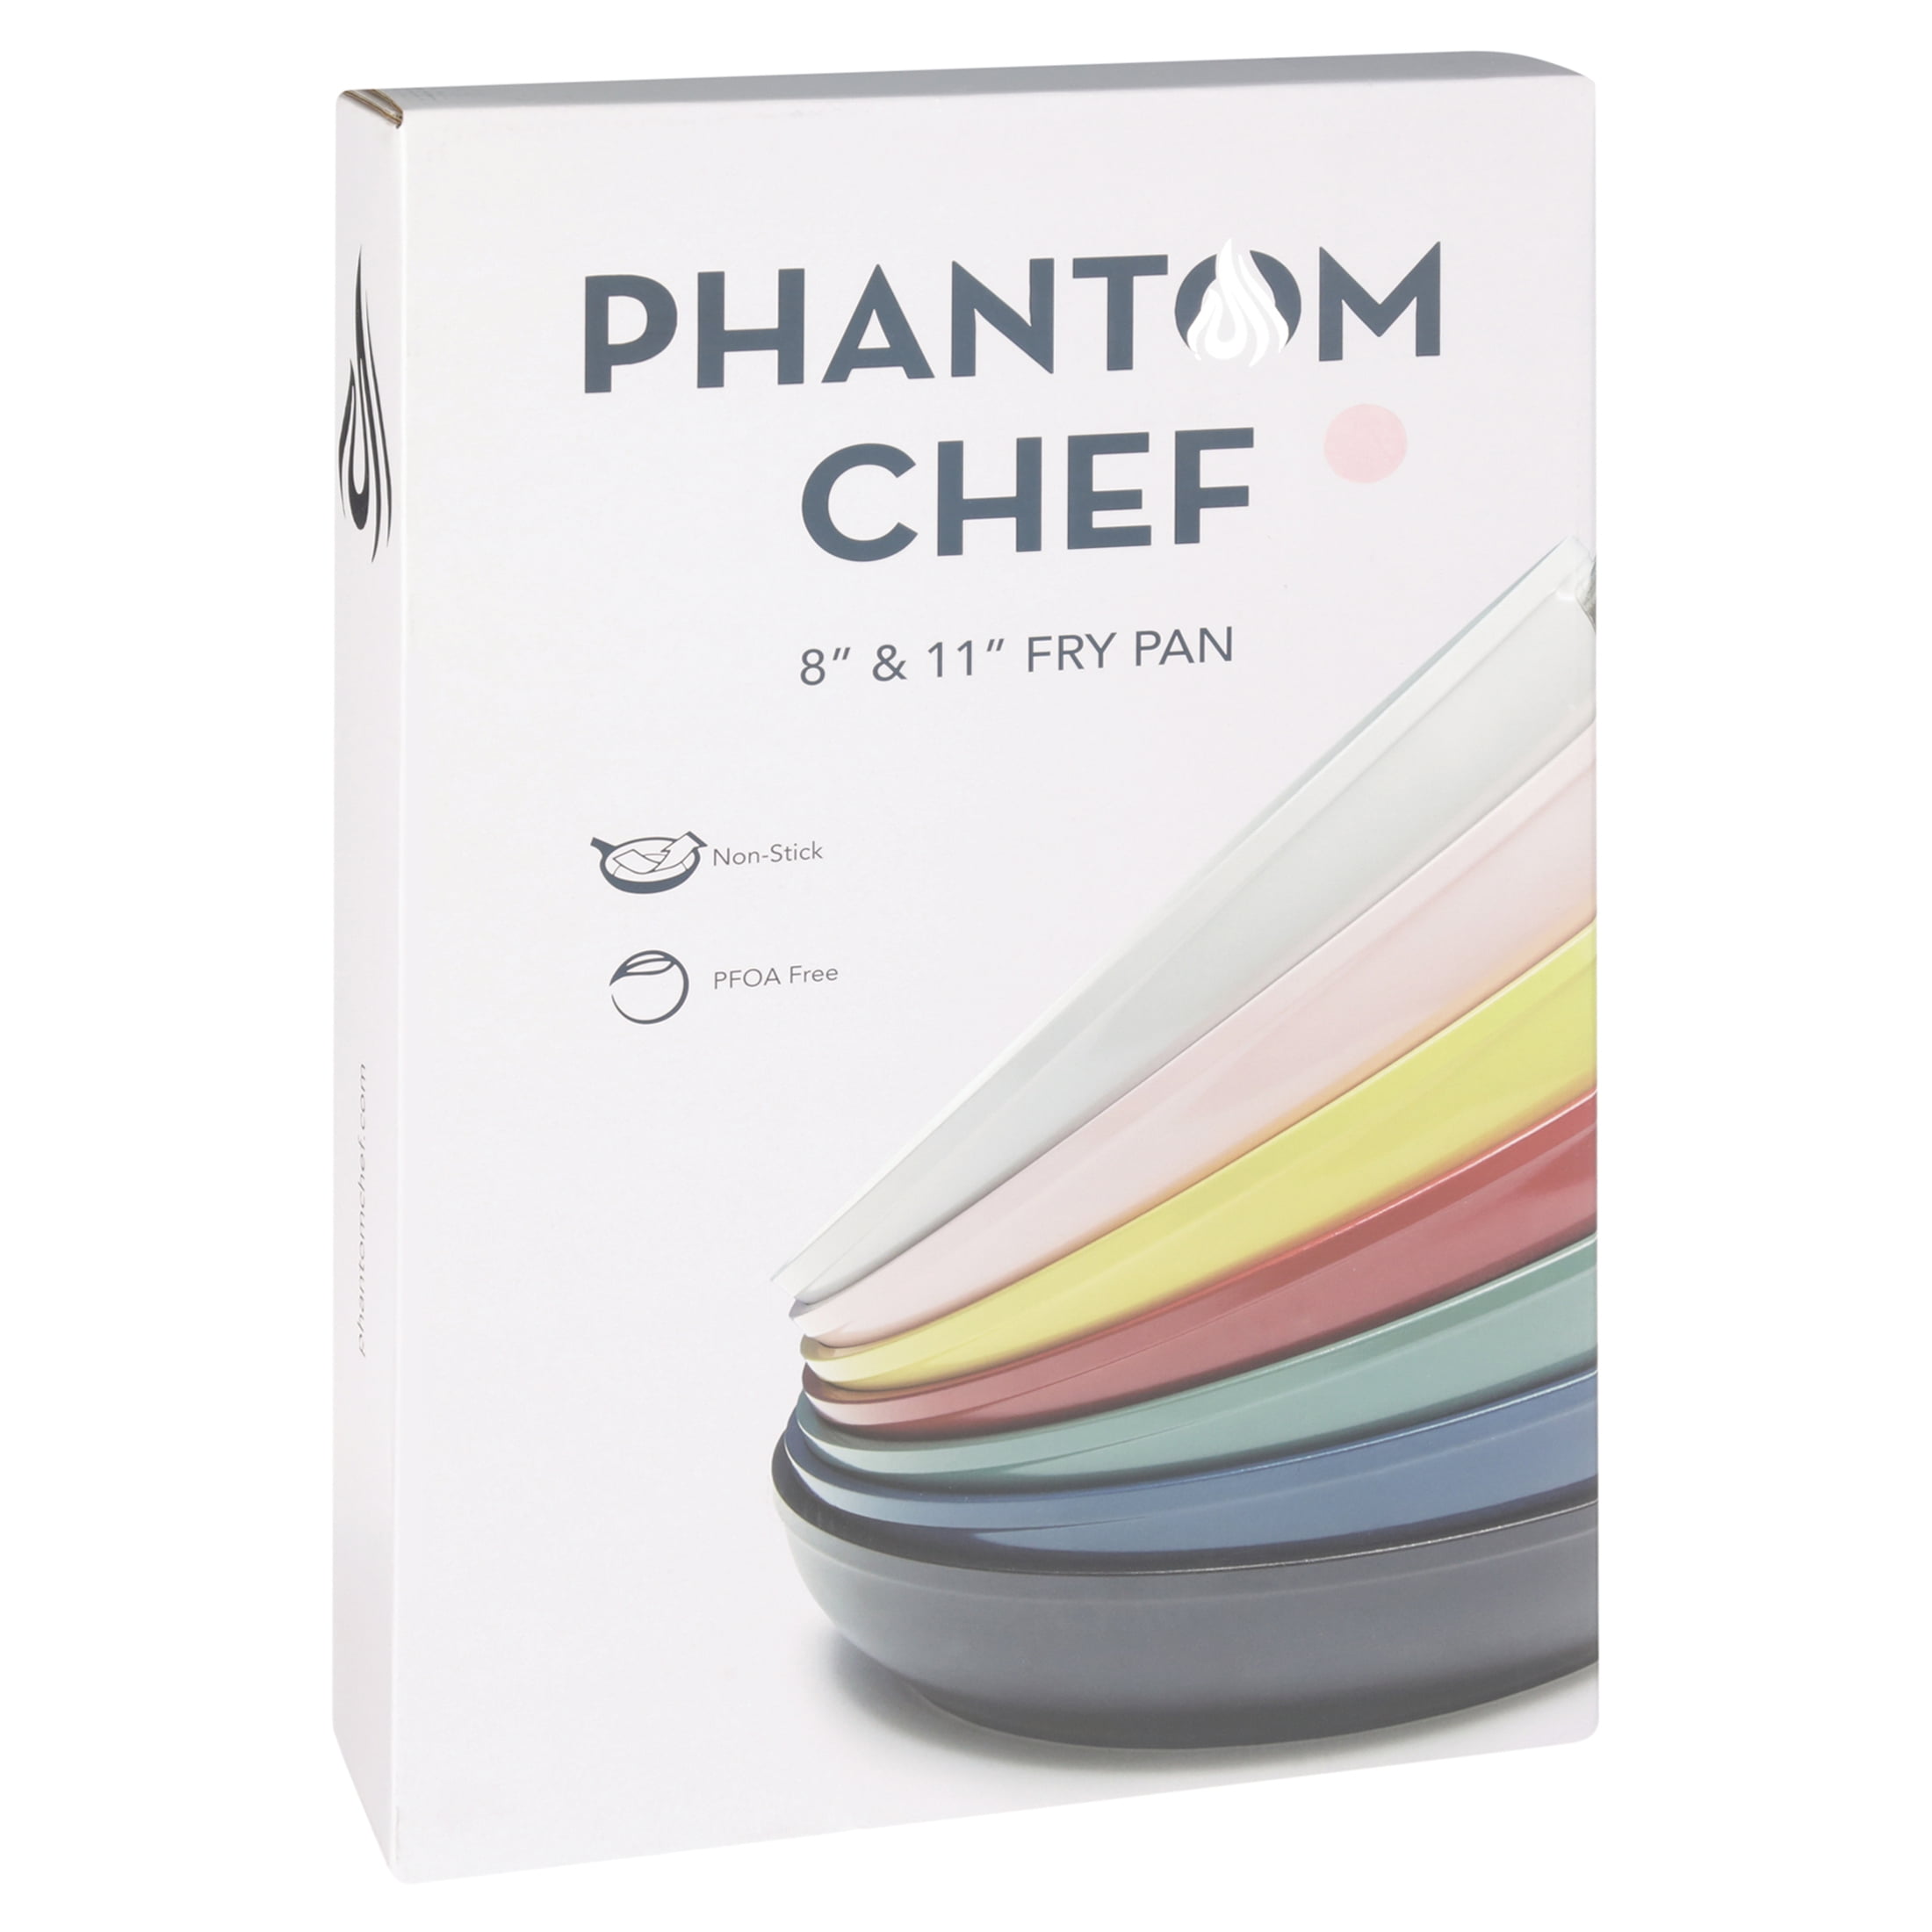 Phantom Chef 8” & 11” Frypan with Wood Handle and Aluminum body – Navy 